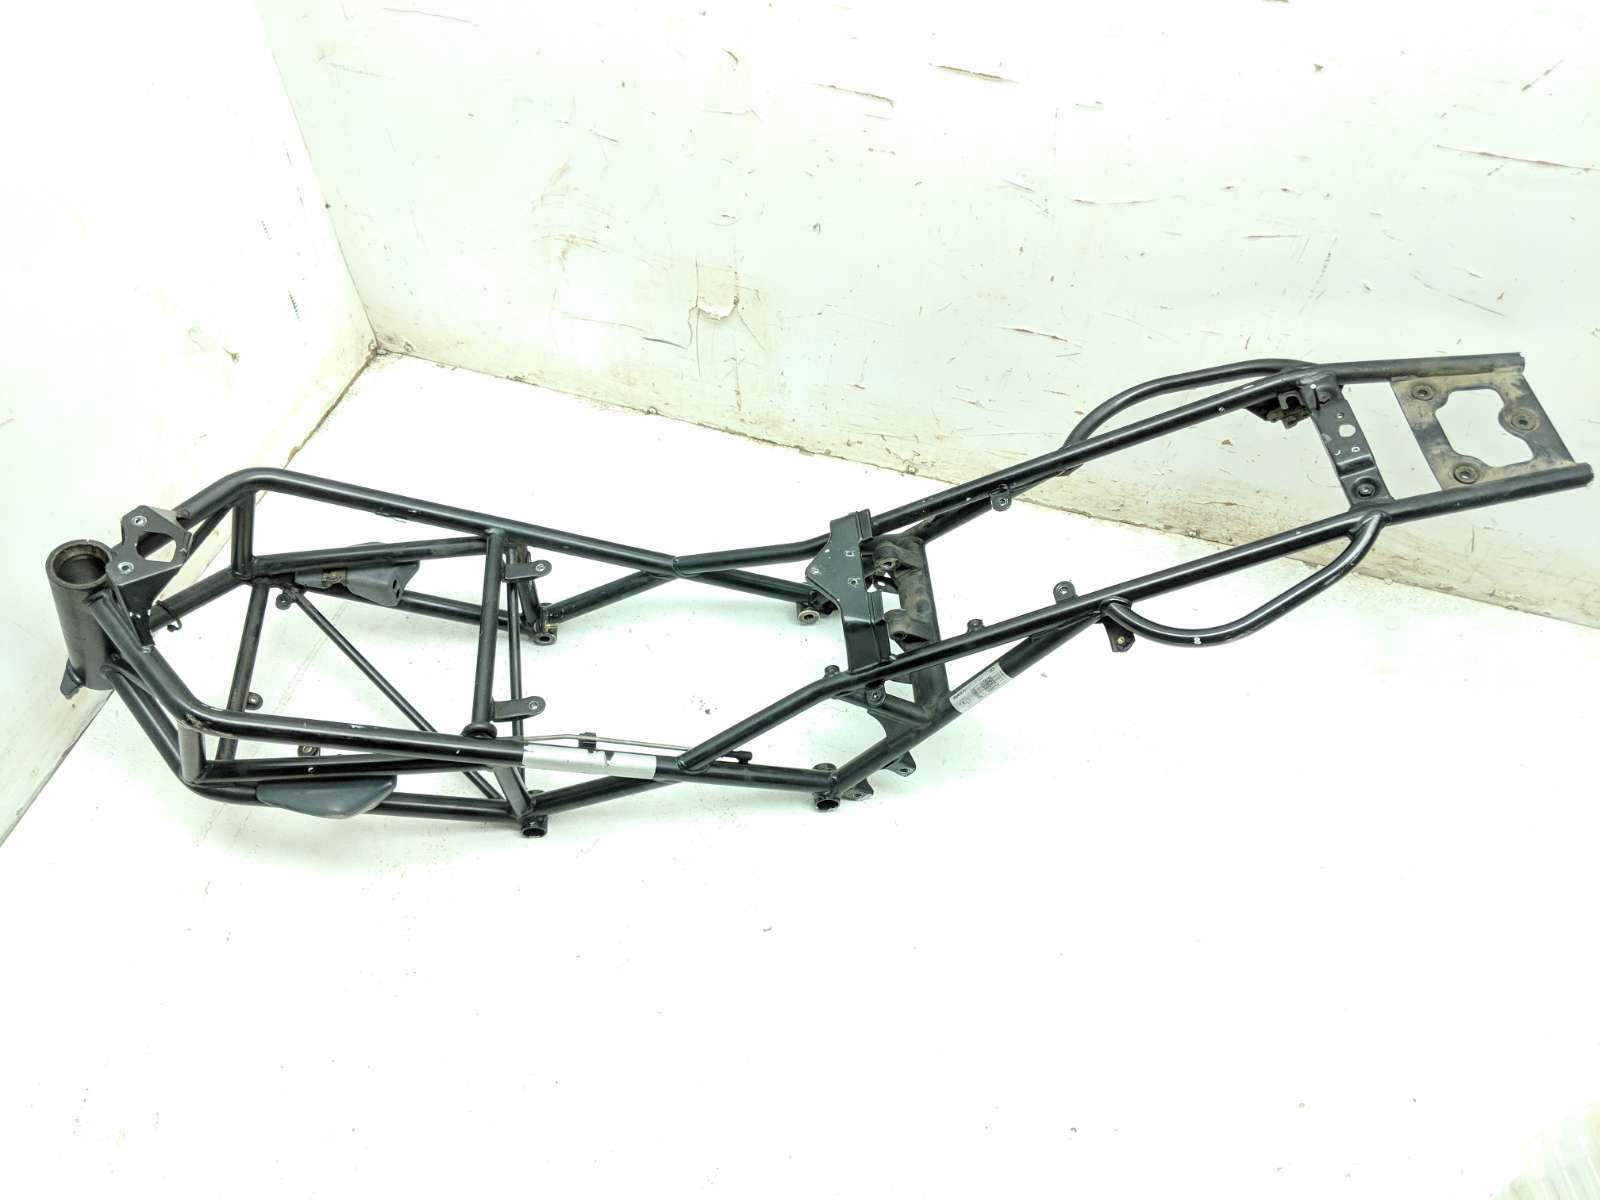 01 Ducati Monster 600 M600 Main Frame Chassis STRAIGHT CLN